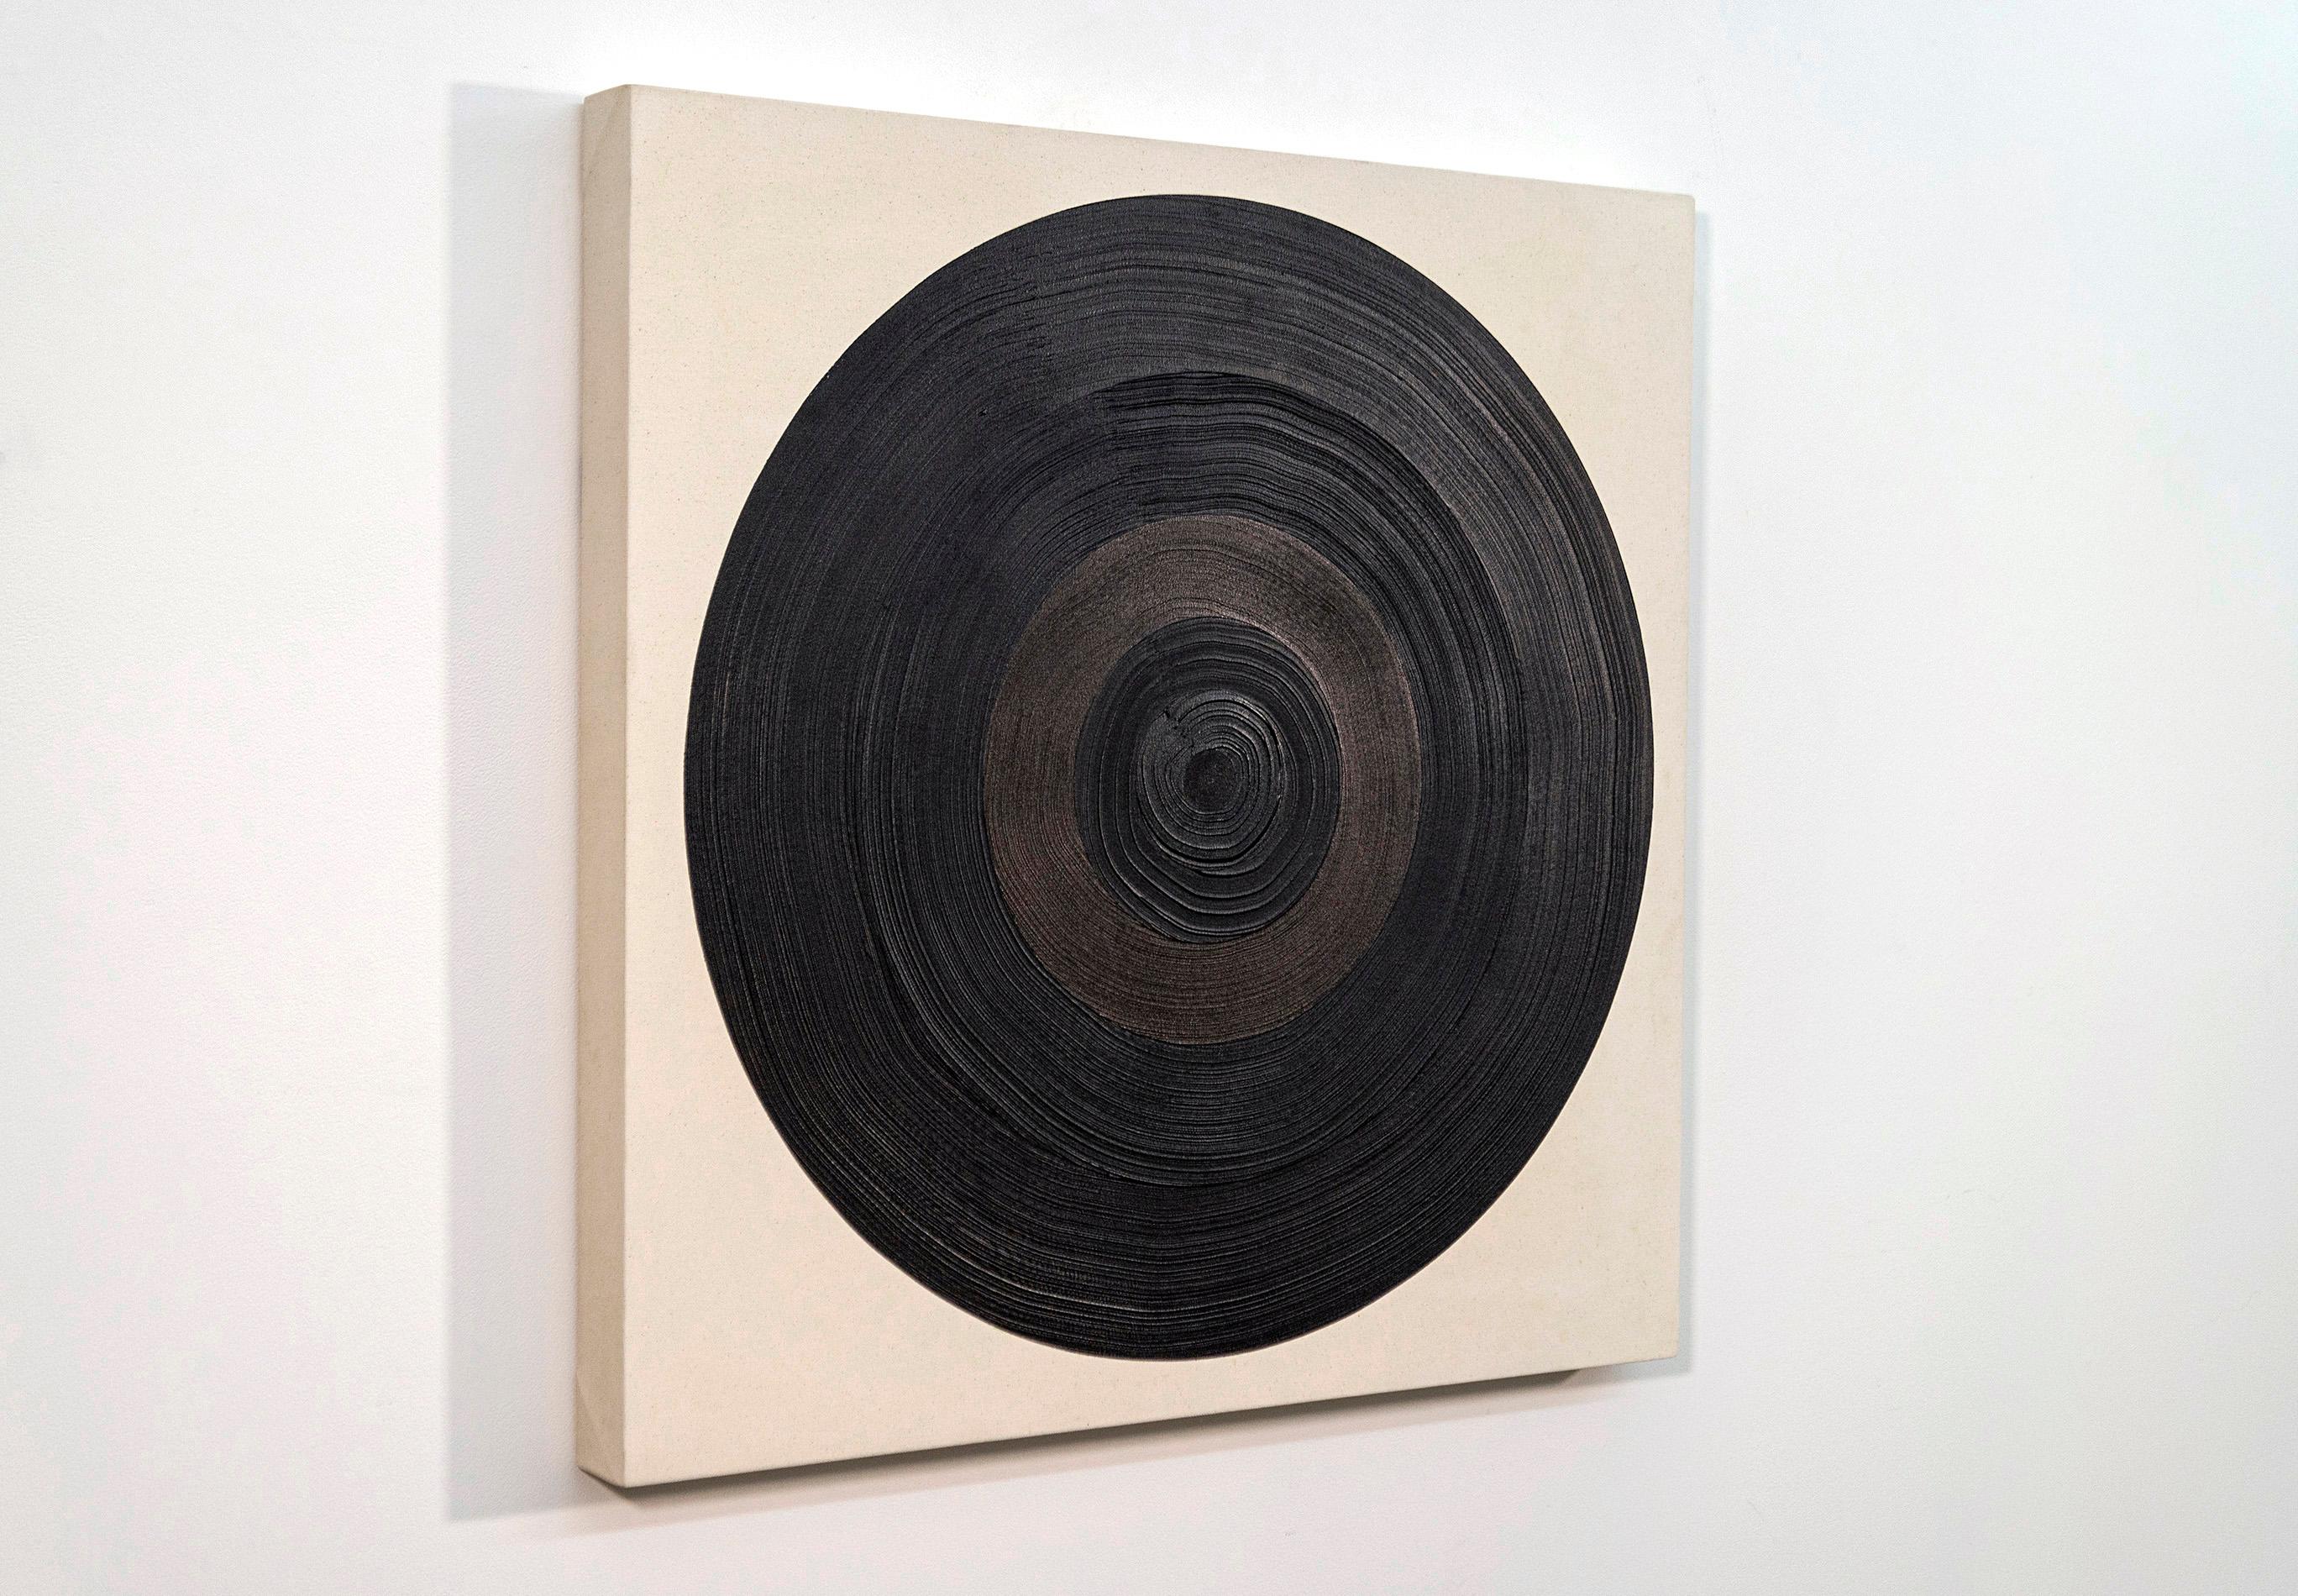 With its bold form and striking black palette, this large circular painting by Yvonne Lammerich makes a dramatic contemporary statement. A close examination of this work reveals circles within circles emanating from a defined target. Lammerich is